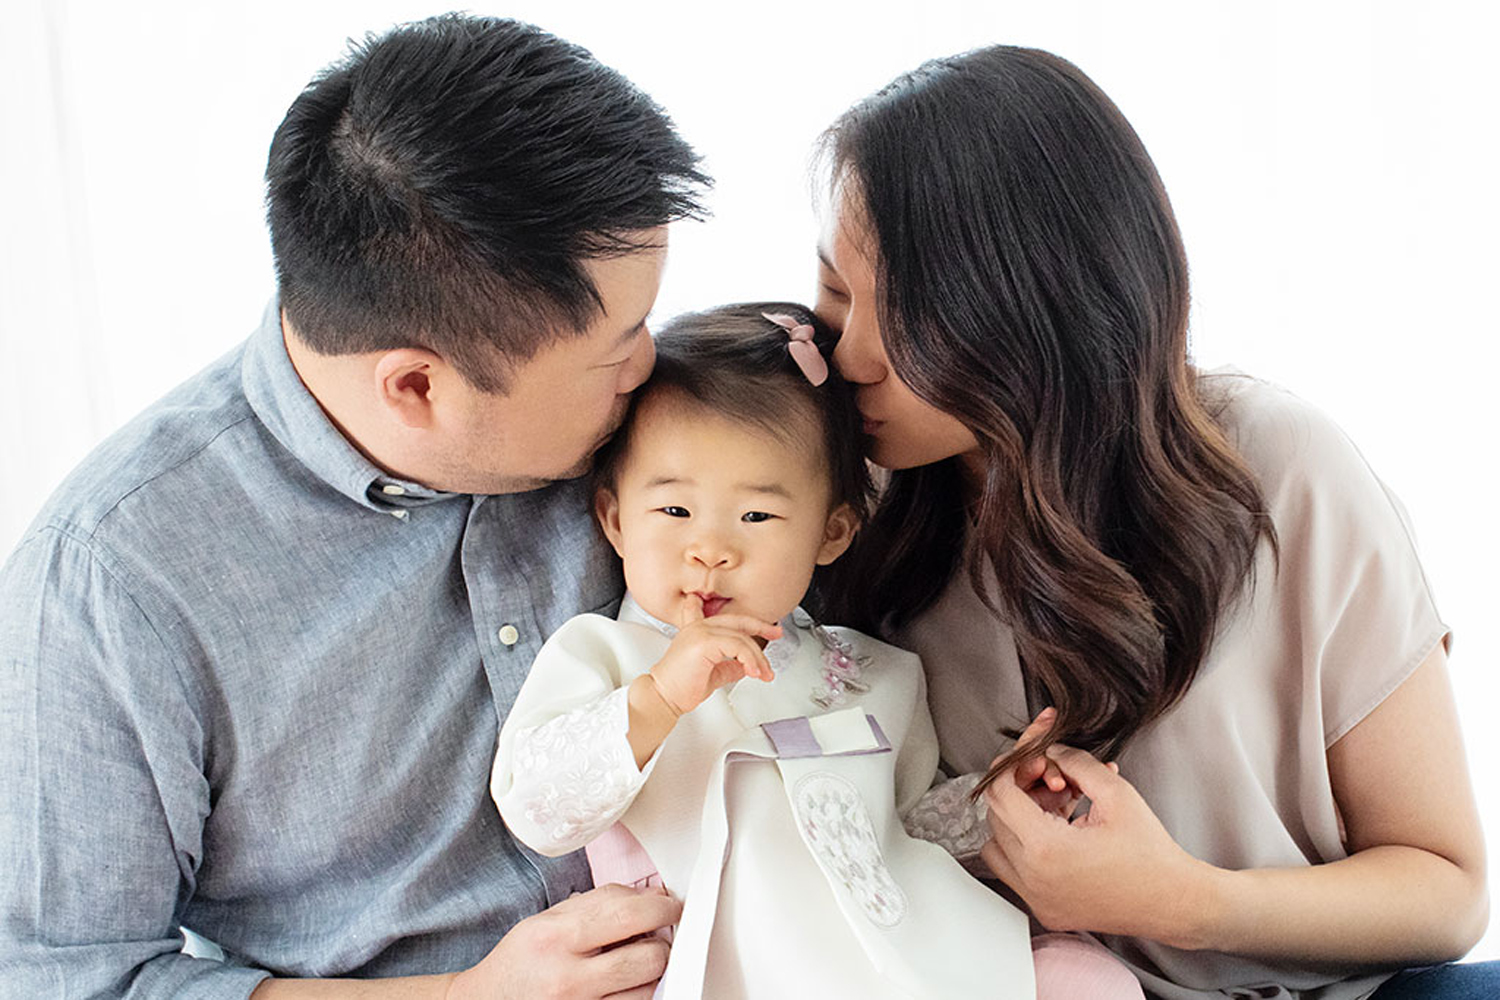 Two parents kiss their one-year-old.